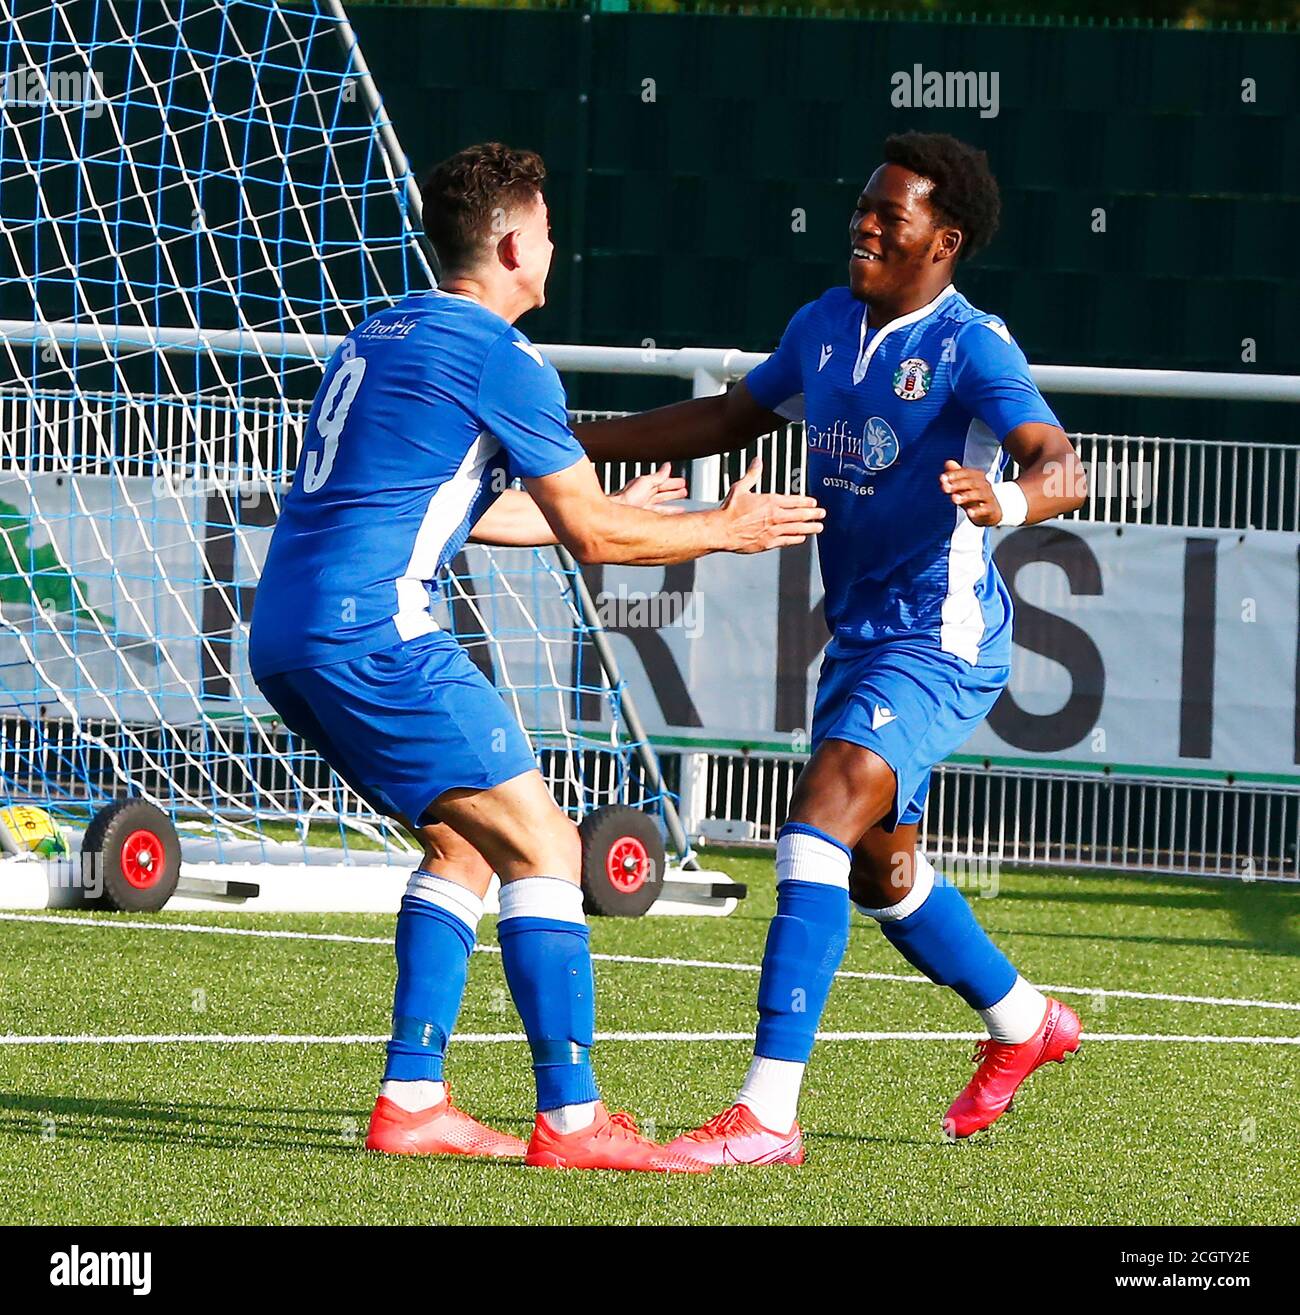 Aveley, UK. 01st Feb, 2018. SOUTHEND, ENGLAND - SEPTEMBER 12: Joseph Agunbiade of Greys Atheltic celebrates Own Goal with Mitchel Hahn of Greys Atheltic during FA Cup - Preliminary Round between Grays Athletic and Witham Town atParkside, Park Lane, Aveley, UK on 12th September 2020 Credit: Action Foto Sport/Alamy Live News Stock Photo